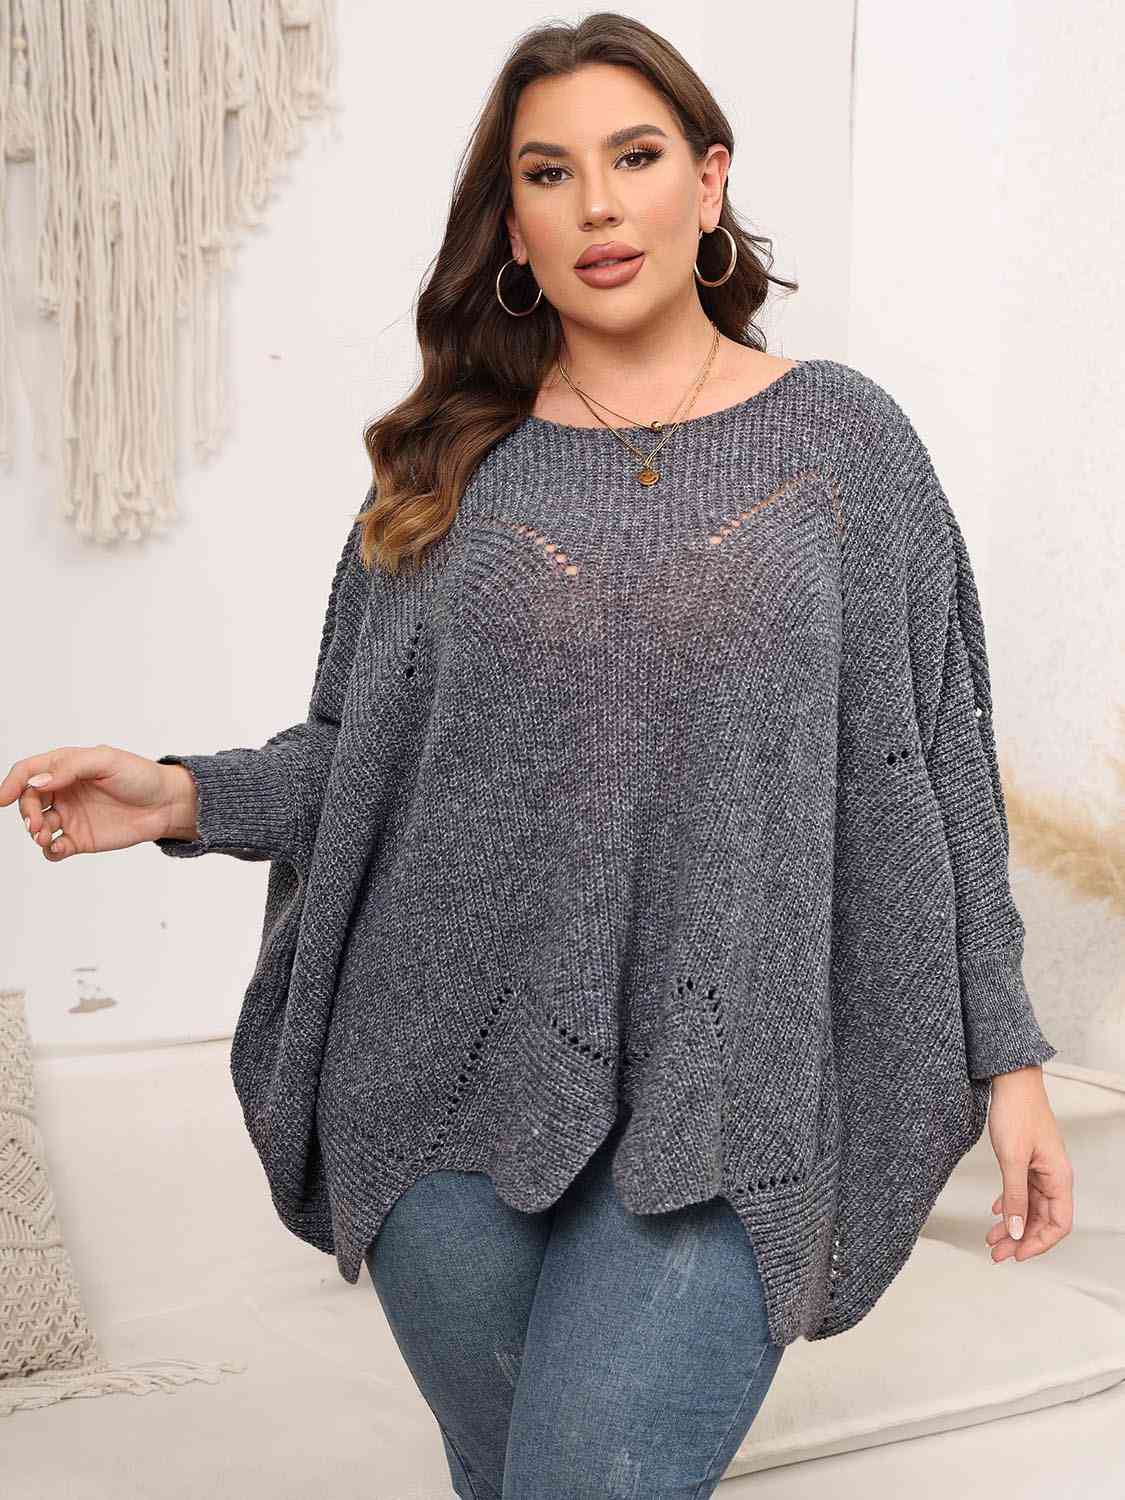 Dark Slate Gray Plus Size Round Neck Batwing Sleeve Sweater Plus Size Clothes